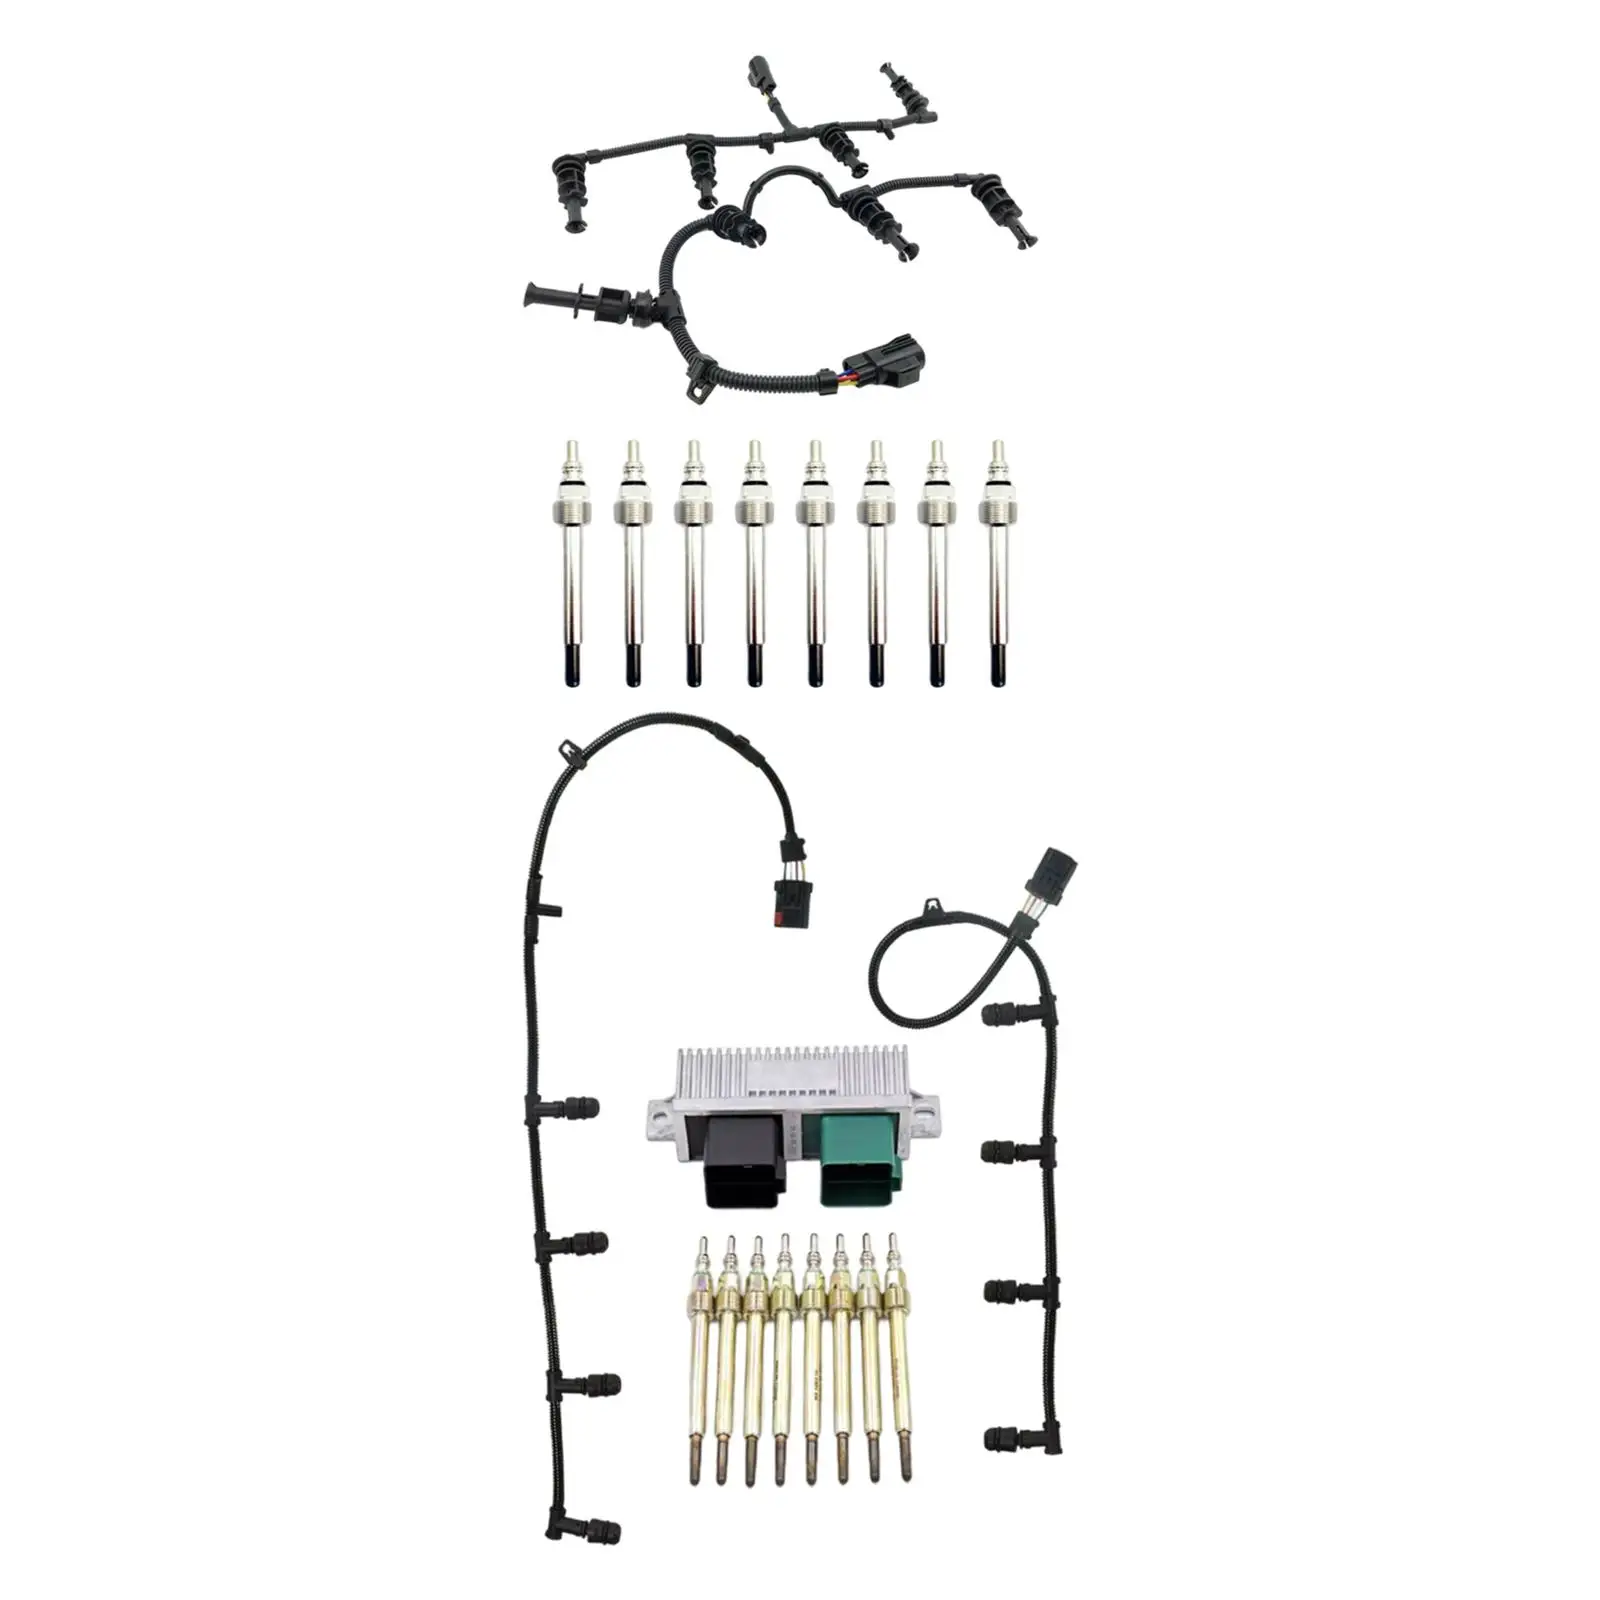 Glow Plug Wire Wiring Harness 8C3A6908C3Z12A342A Replacement Parts Set for   Duty   6.4L 08 2009 2010